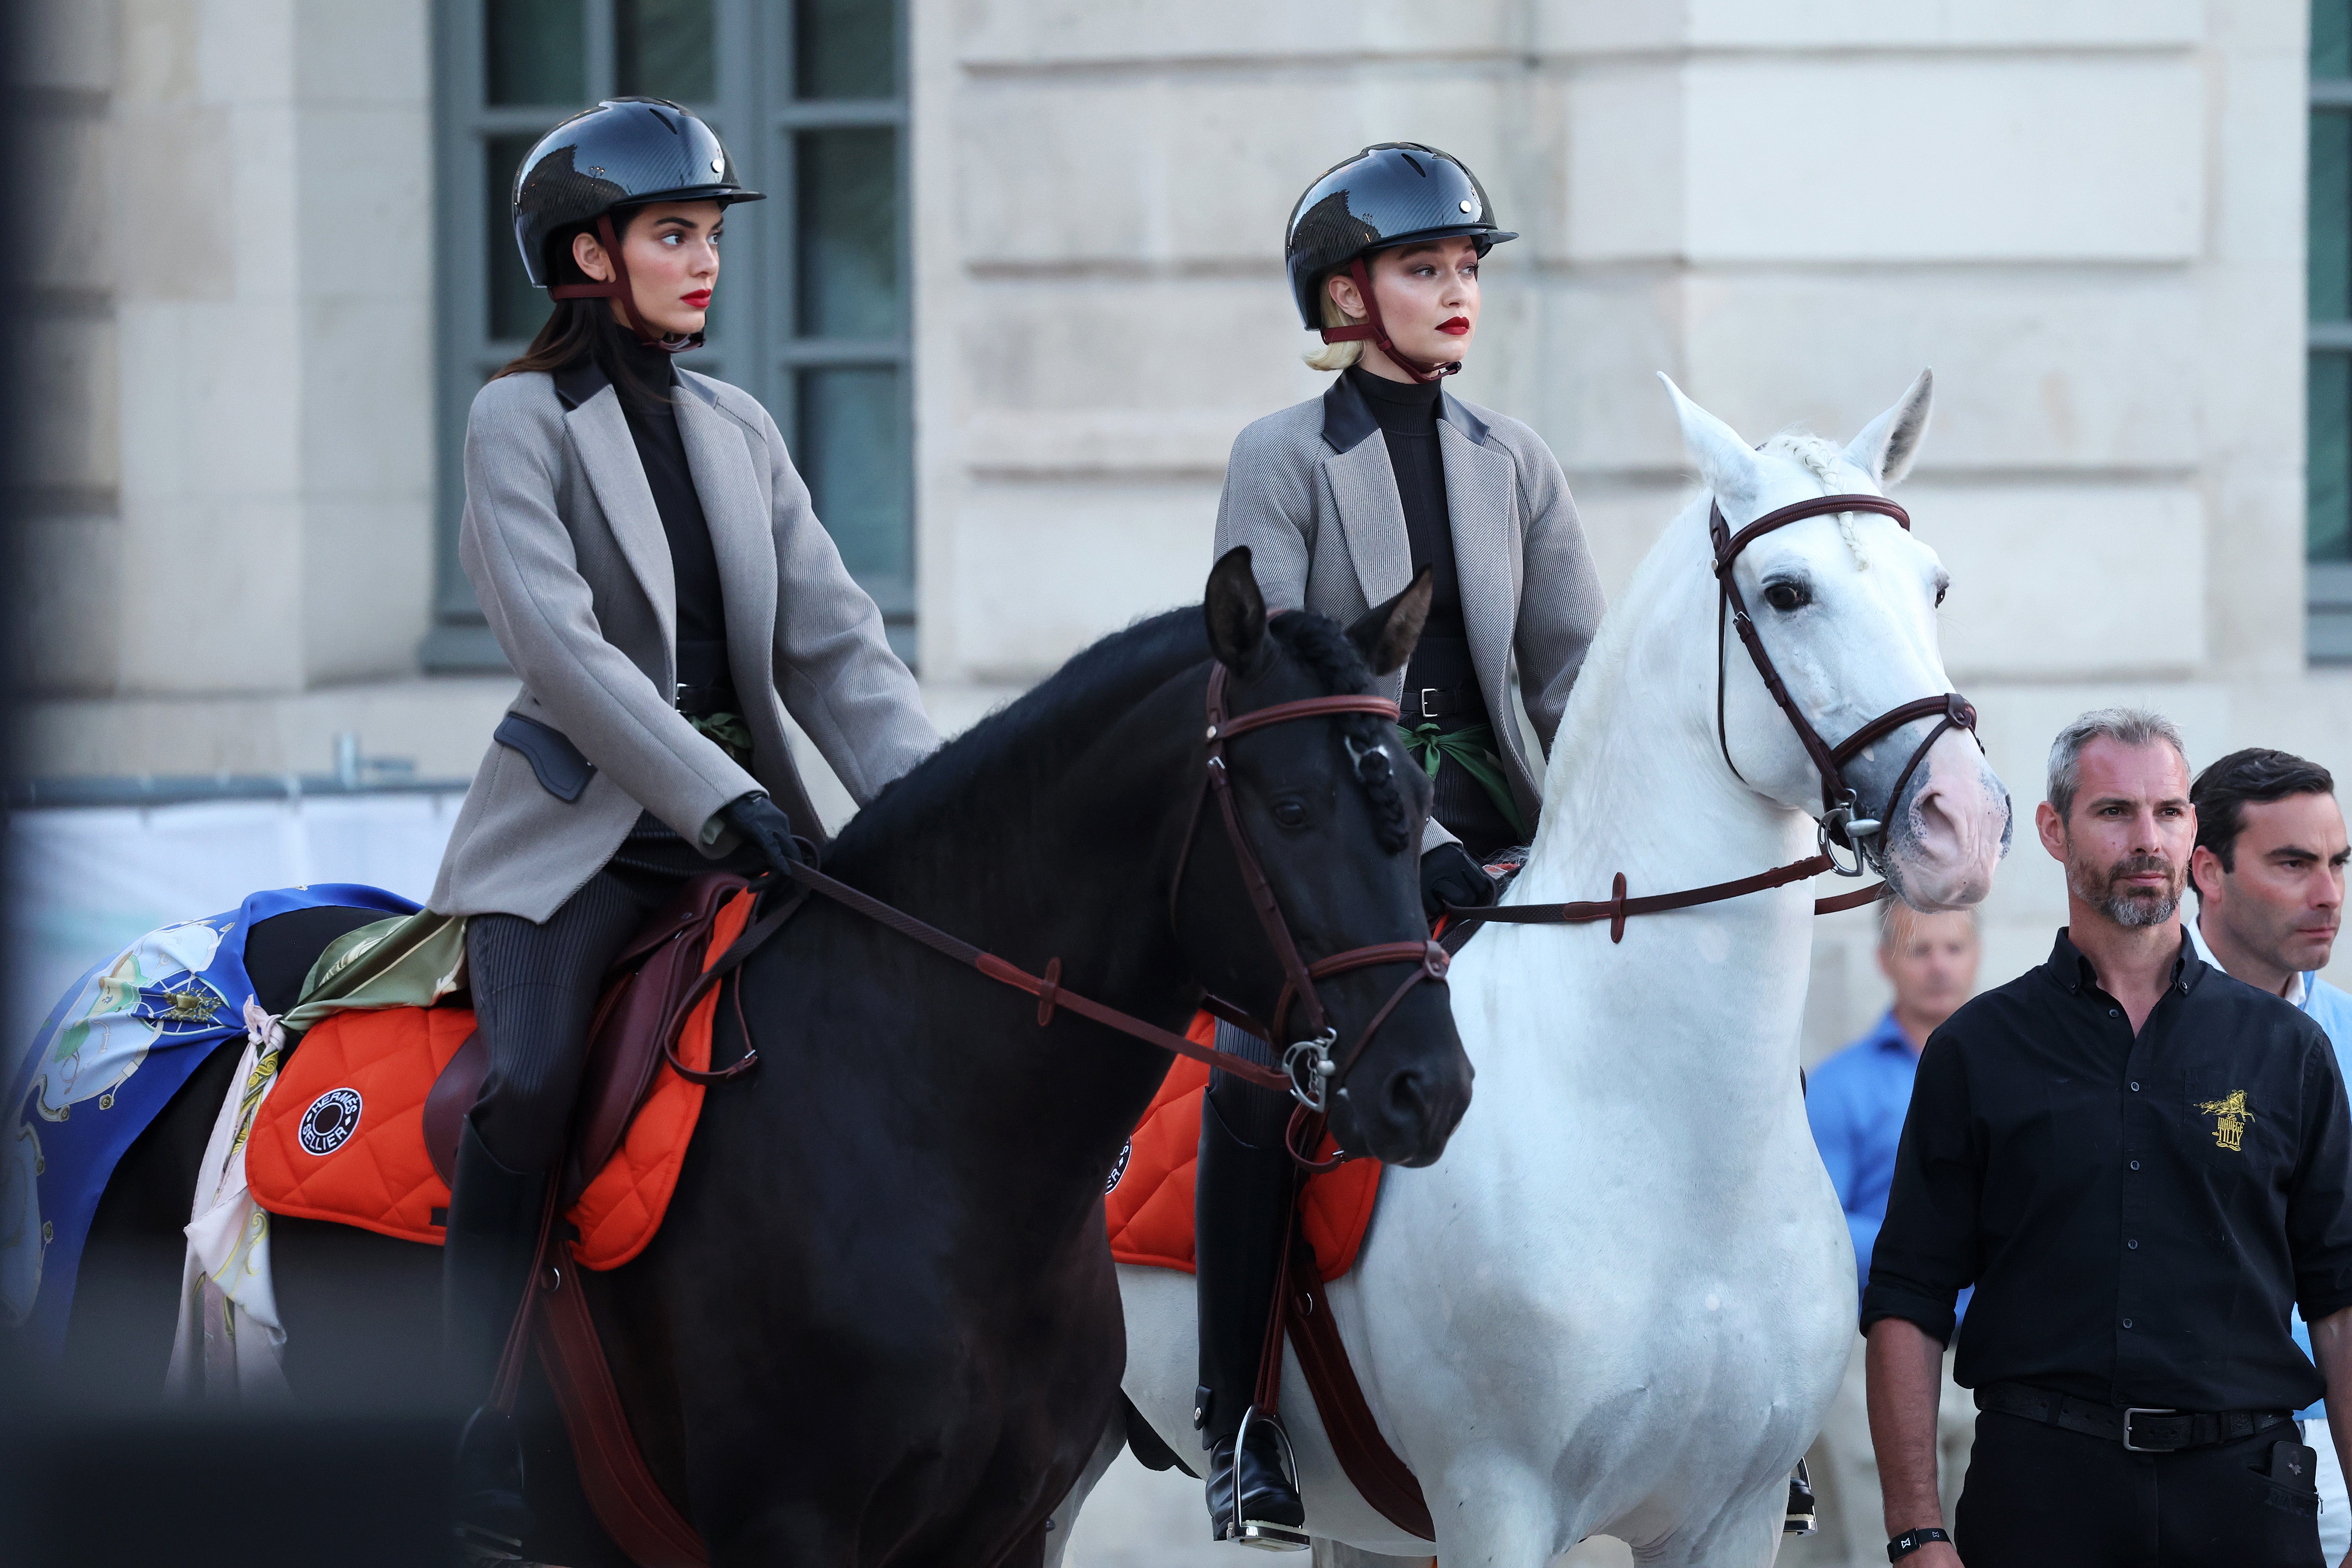 Kendall Jenner and Gigi Hadid ride horses on the runway during Vogue World: Paris